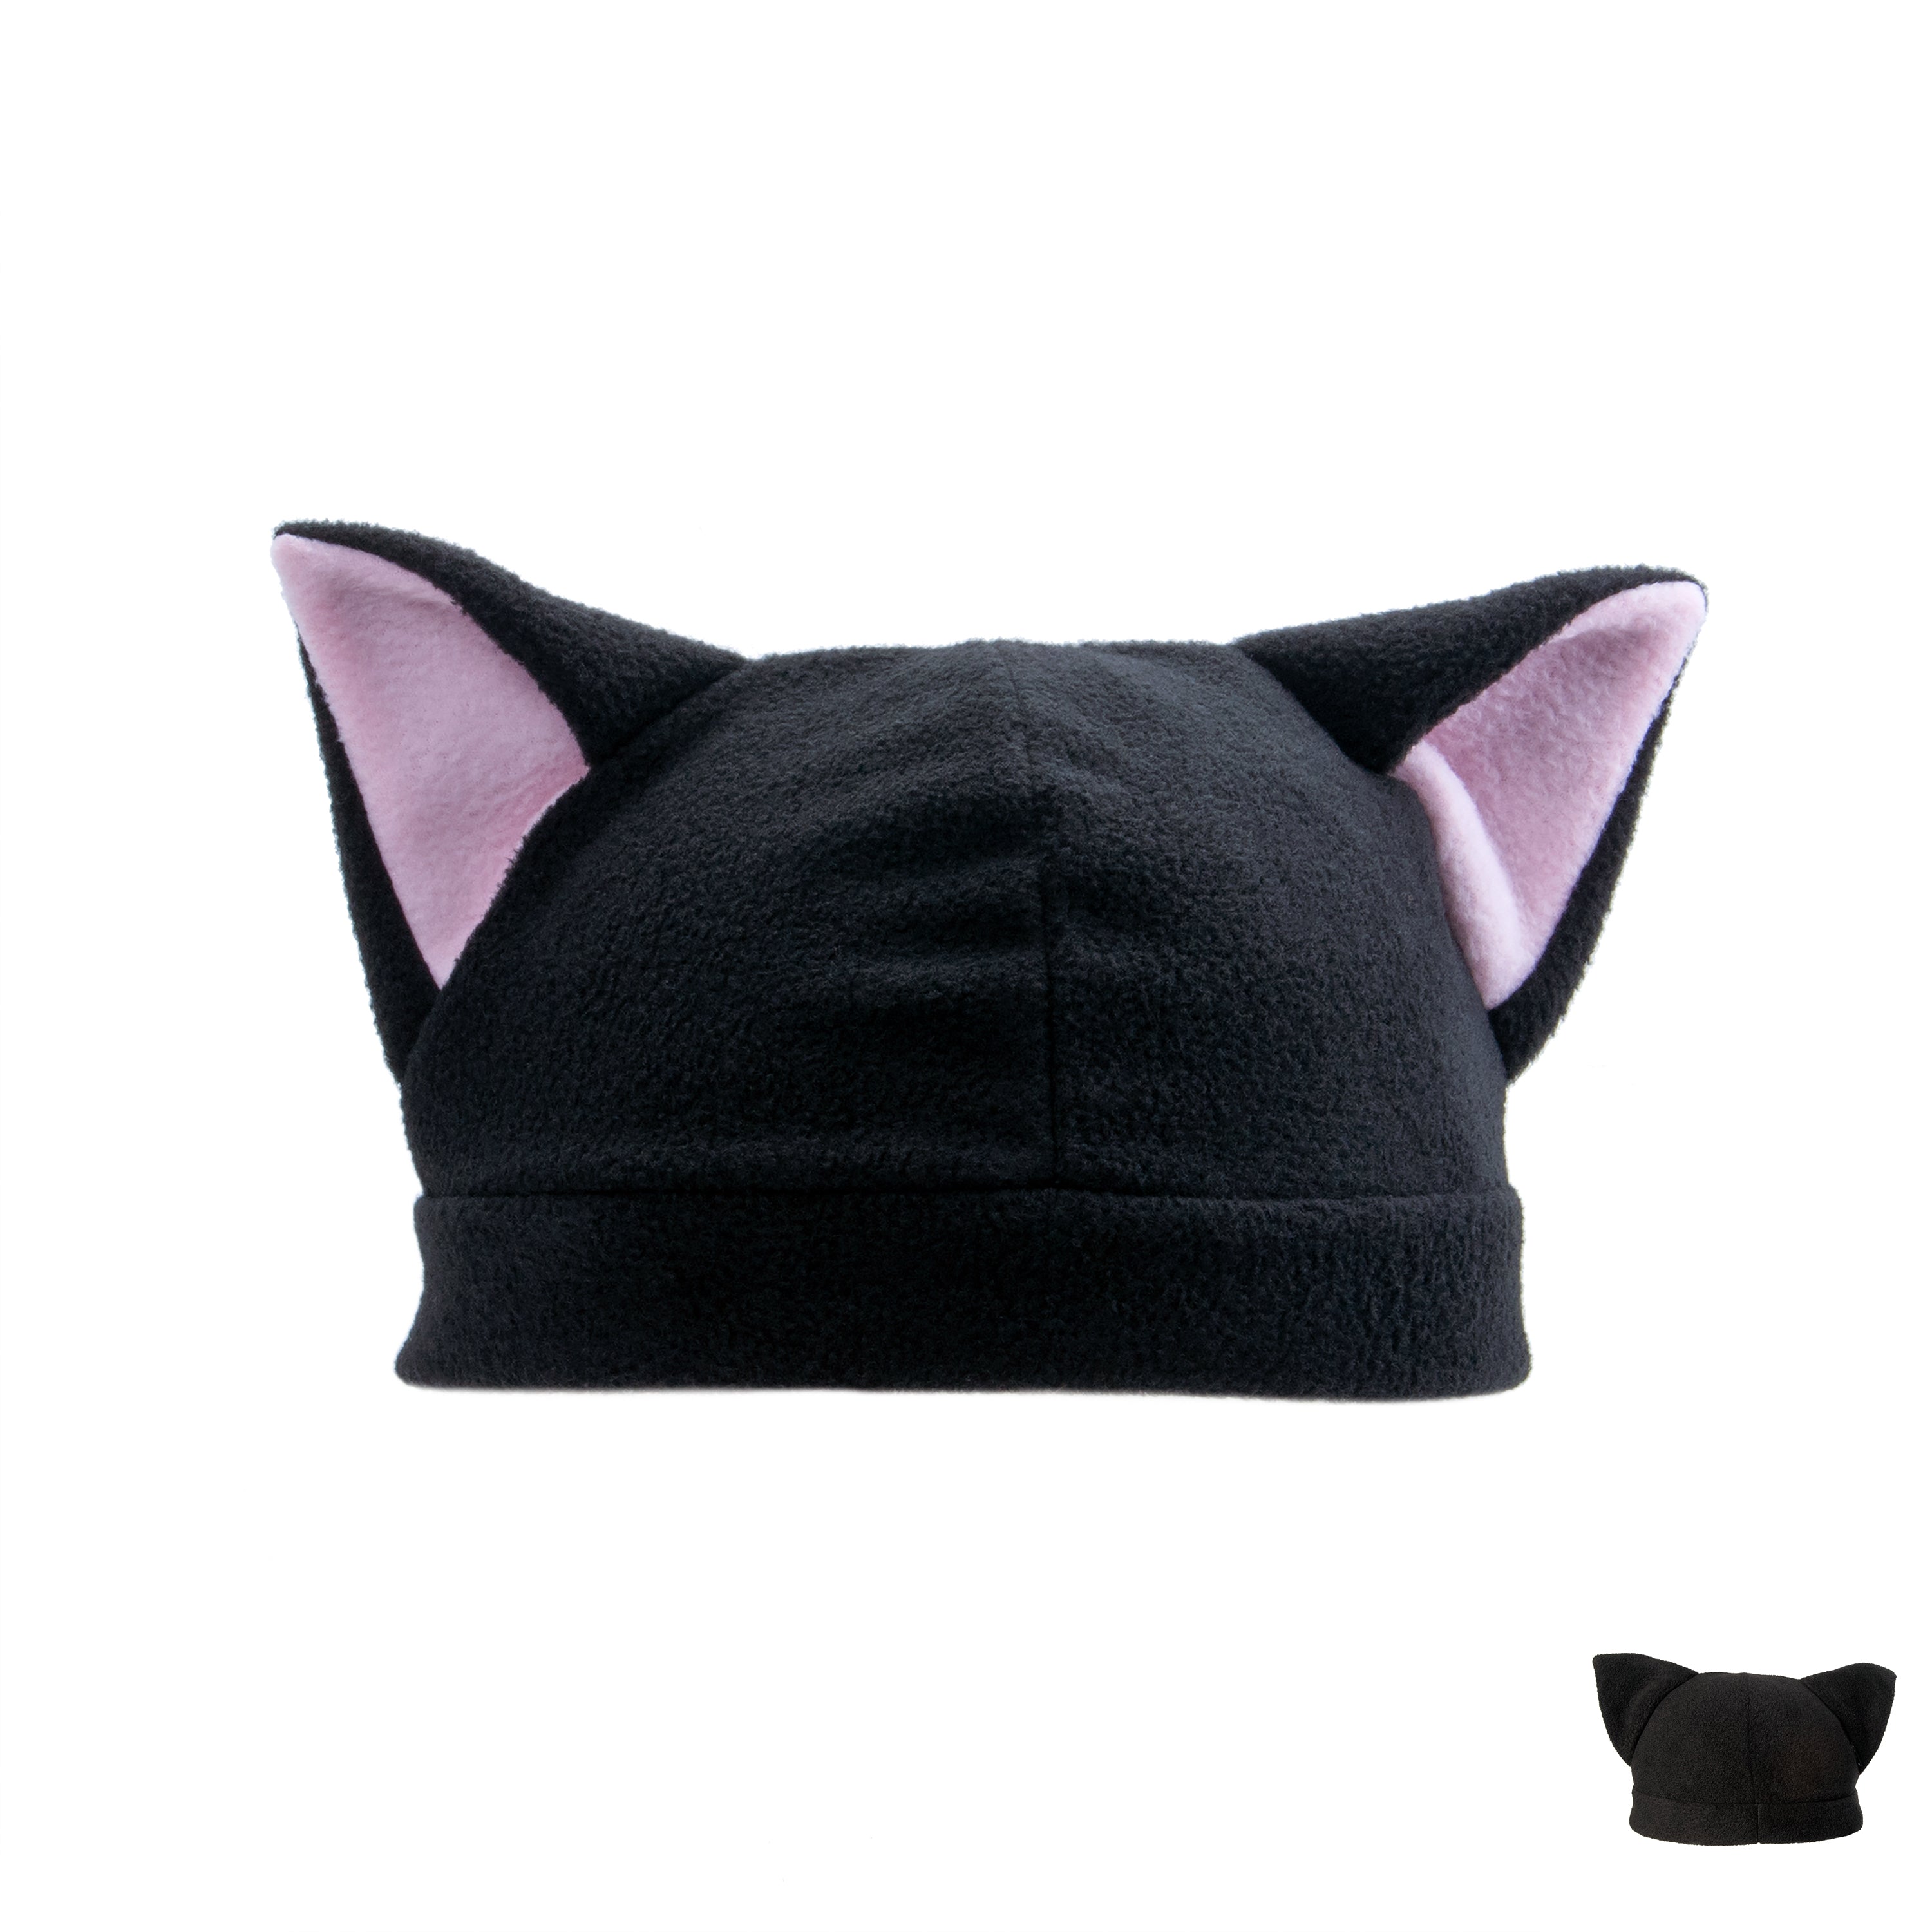 Pawstar Fleece Kitty Hat partial fursuit, Halloween costume, cosplay, and furry